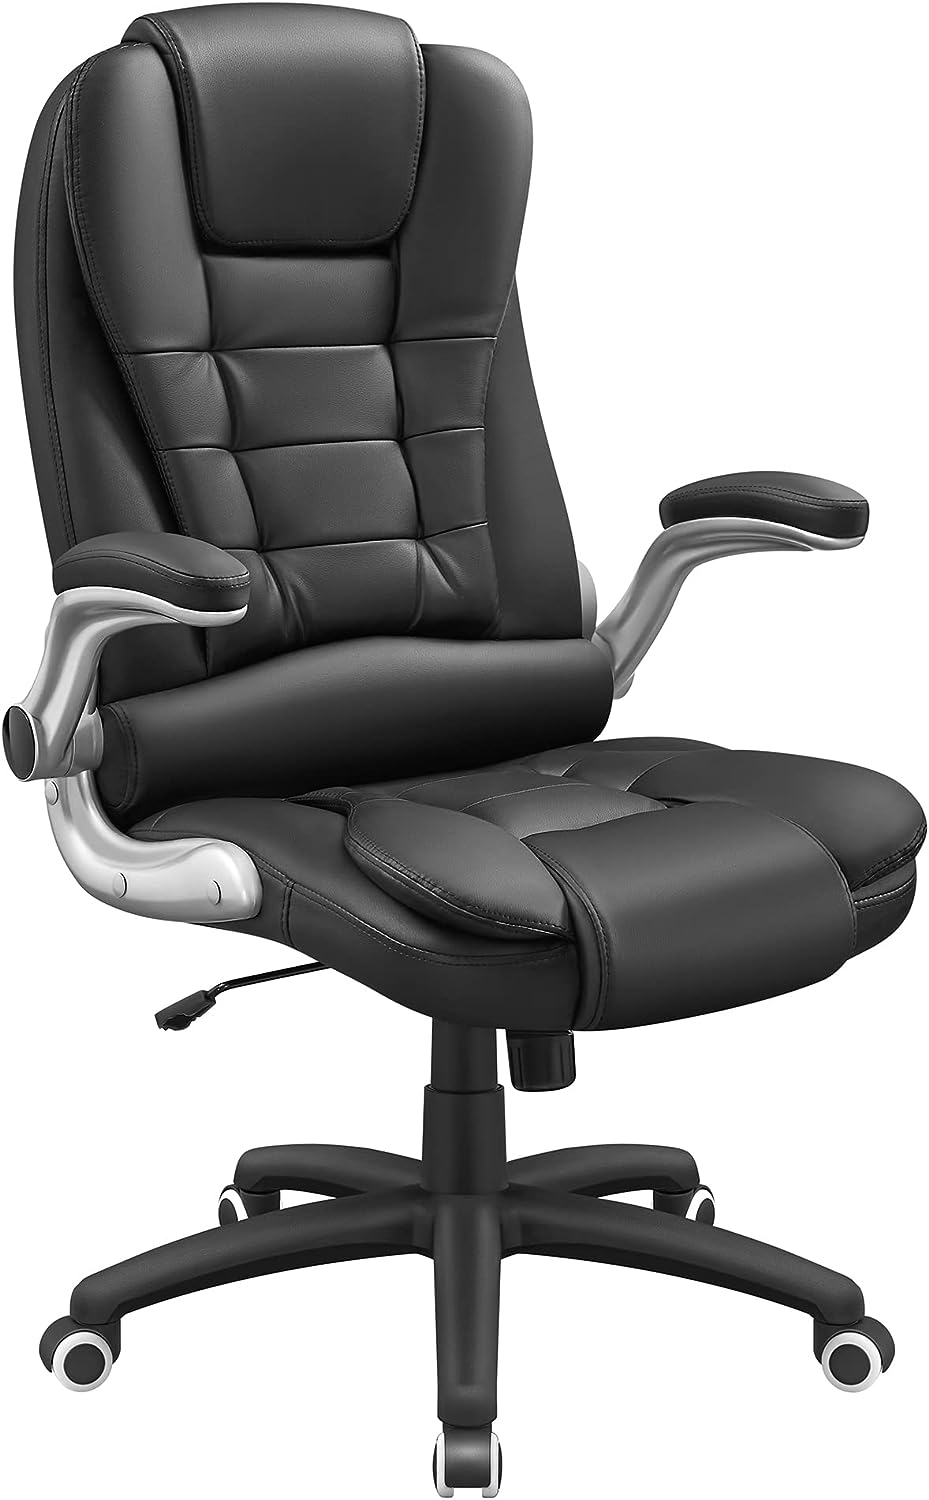 Best Office Chair For Hypermobility - Living with Hypermobility